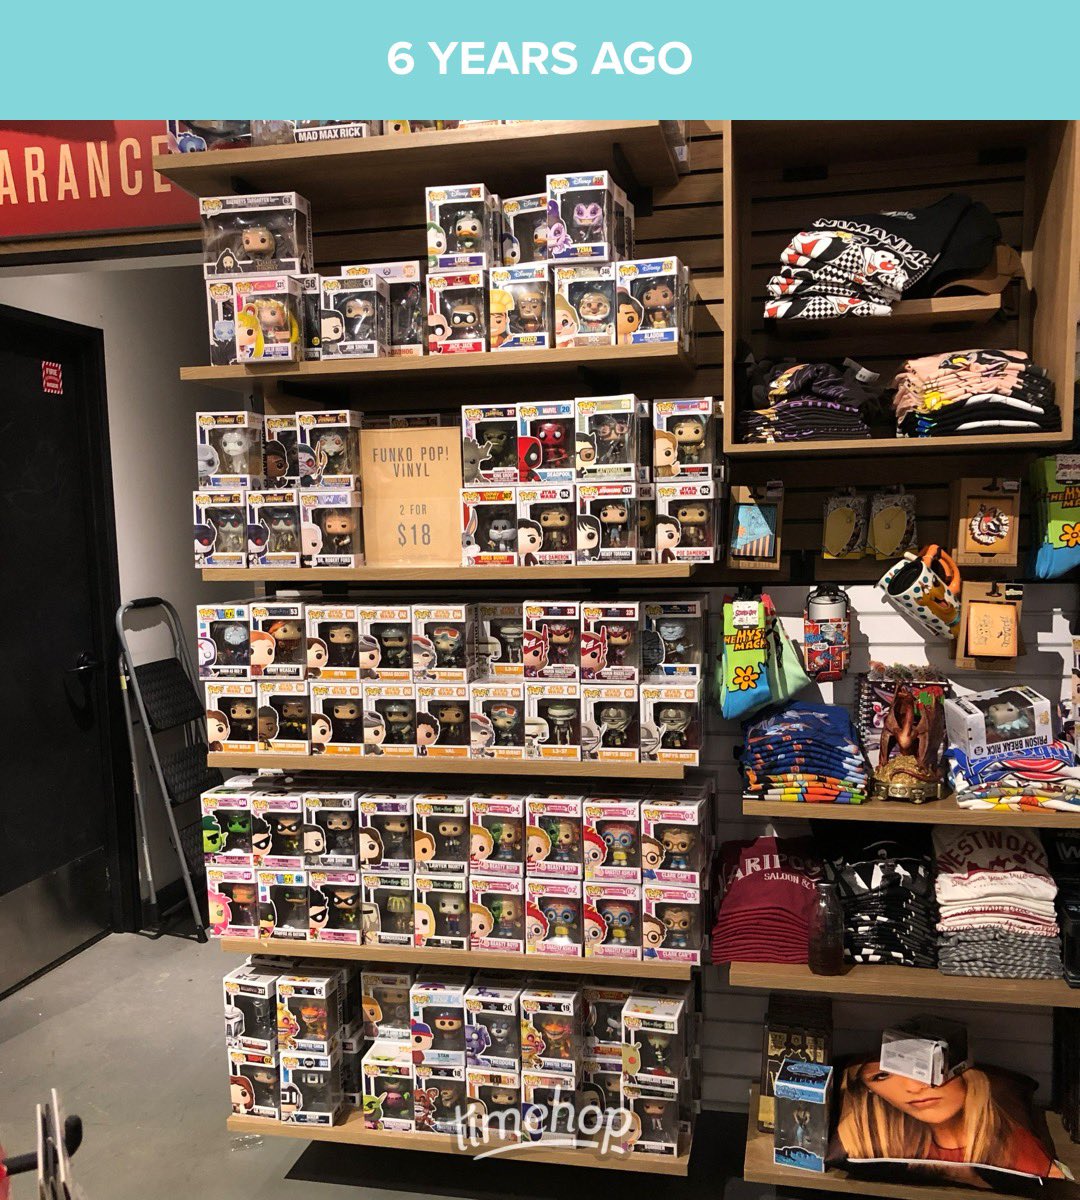 Any grails in this pic? 🤔
.
#Funko #FunkoPop #FunkoPopVinyl #Pop #PopVinyl #Collectibles #Collectible #FunkoCollector #FunkoPops #Collector #Toy #Toys #DisTrackers